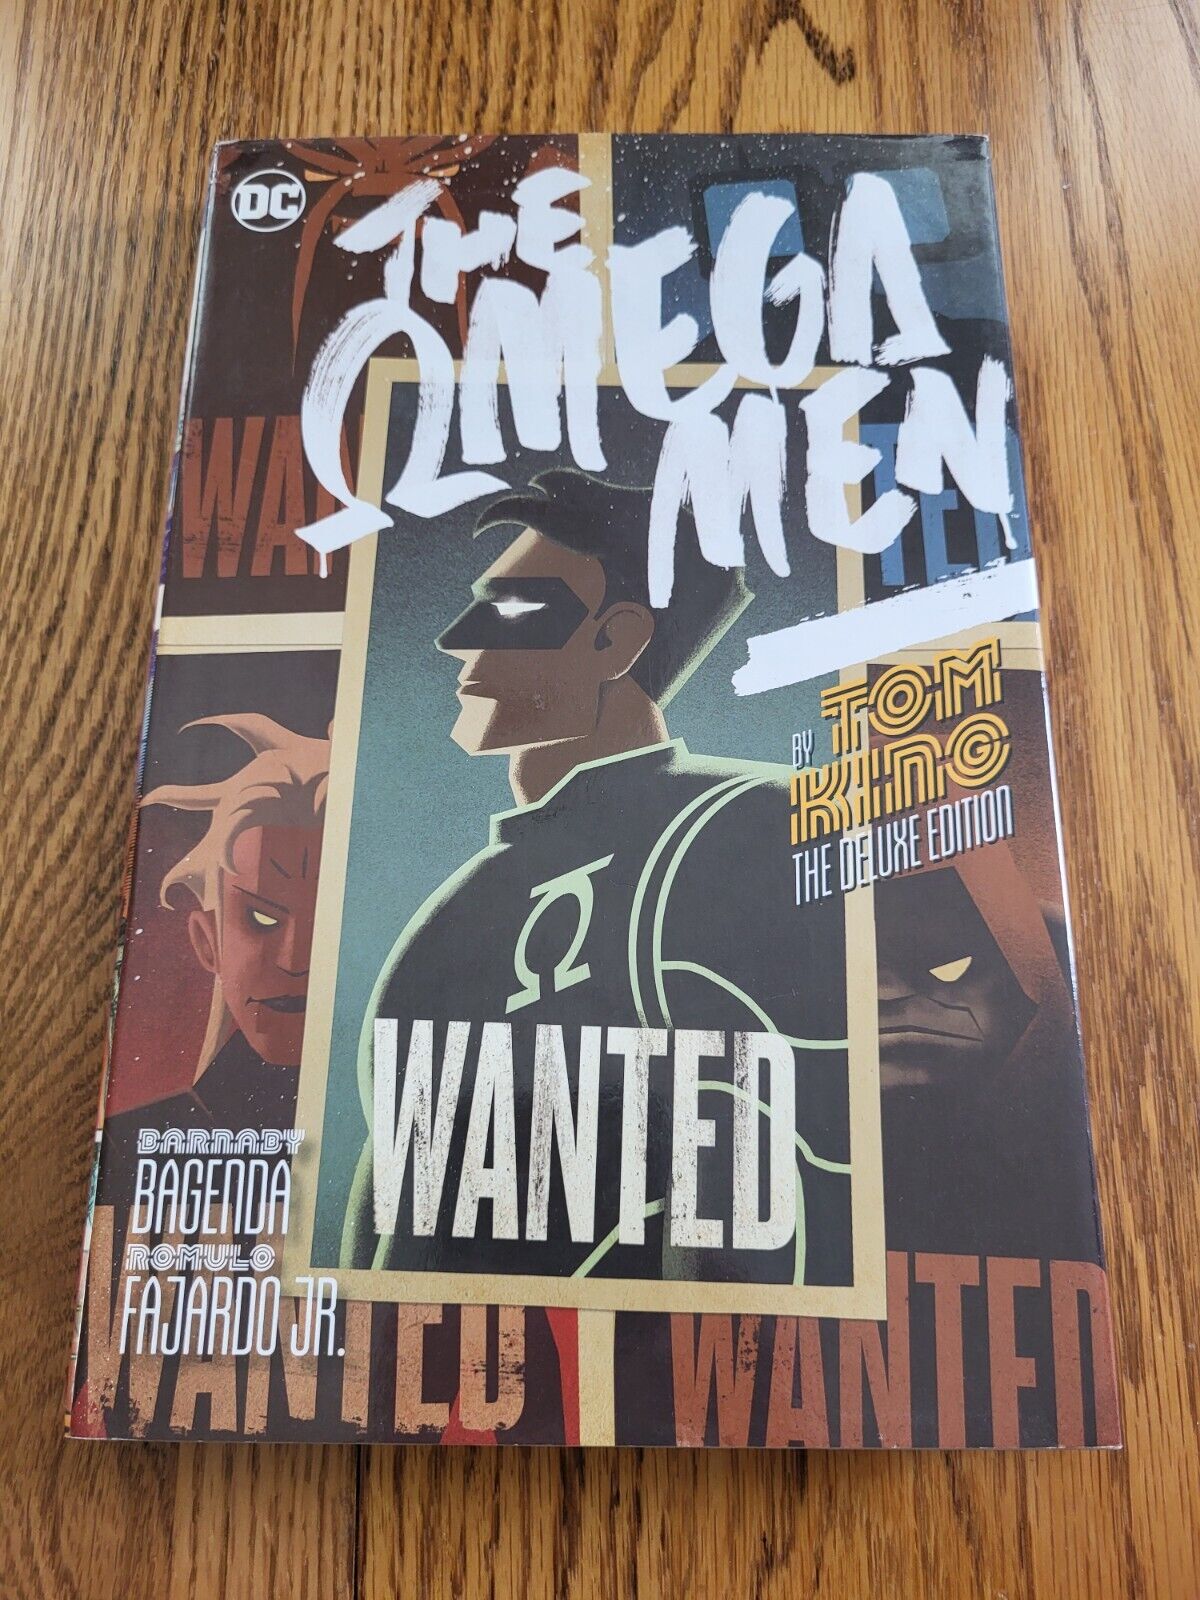 DC Comics The Omega Men by Tom King - Deluxe Edition (Hardcover, 2020)